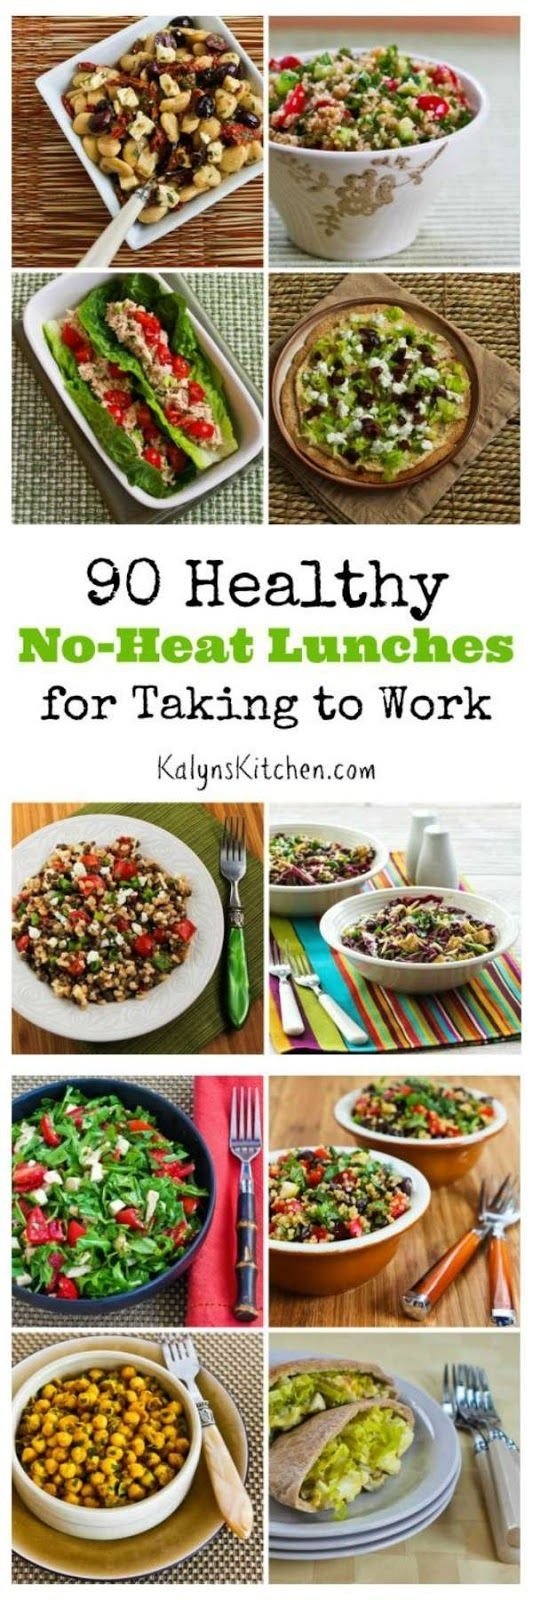 10 Lovable Lunch Ideas For Construction Workers 2023